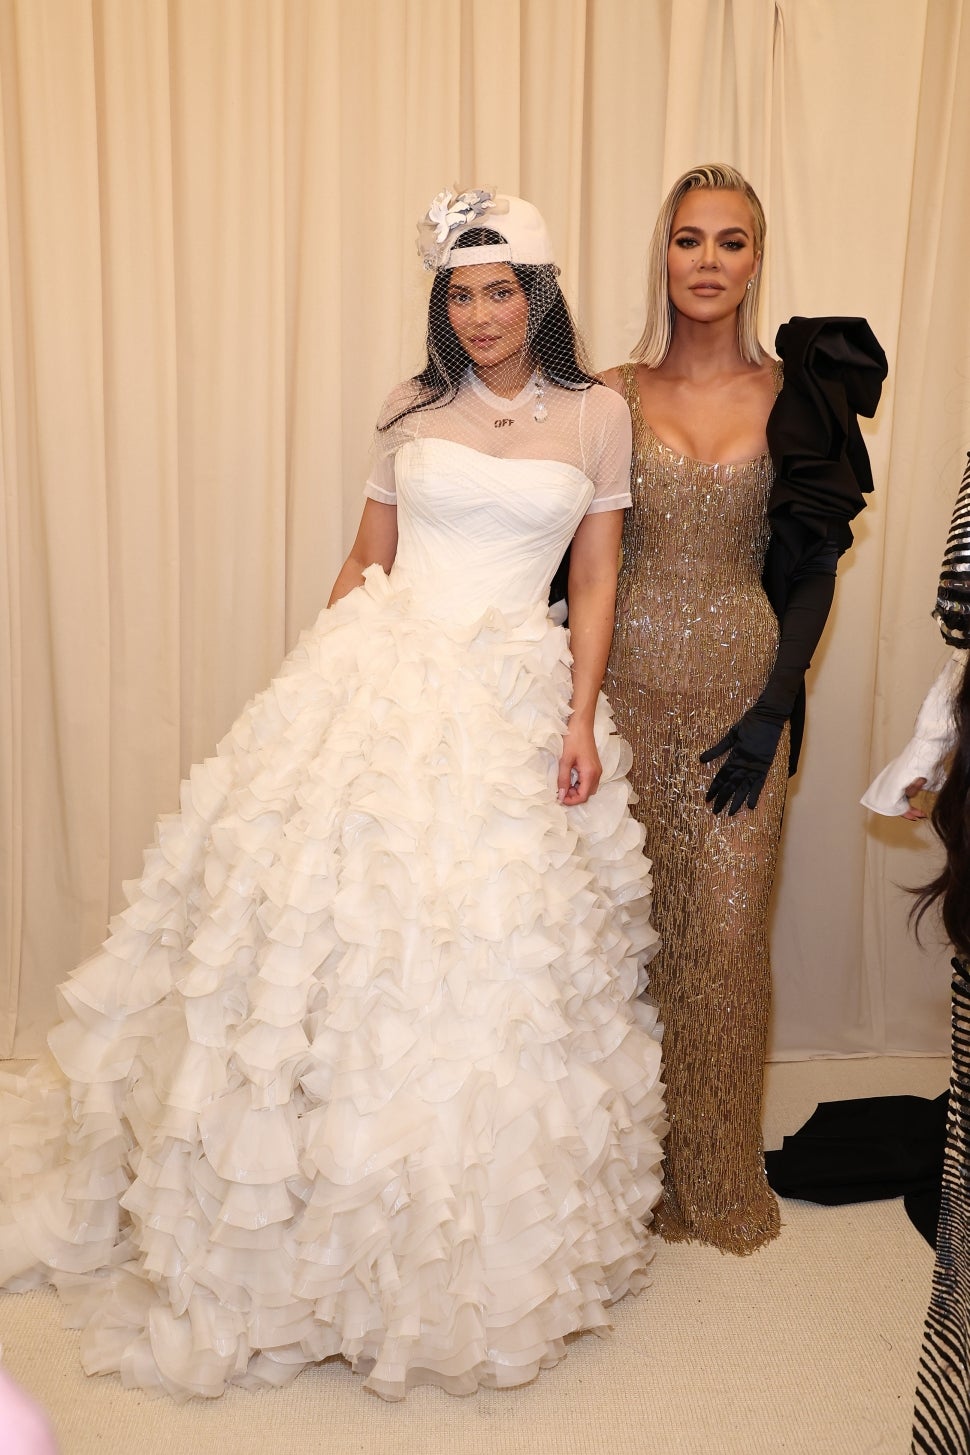 Kylie Jenner and Khloé Kardashian arrive at The 2022 Met Gala Celebrating "In America: An Anthology of Fashion" at The Metropolitan Museum of Art on May 02, 2022 in New York City.